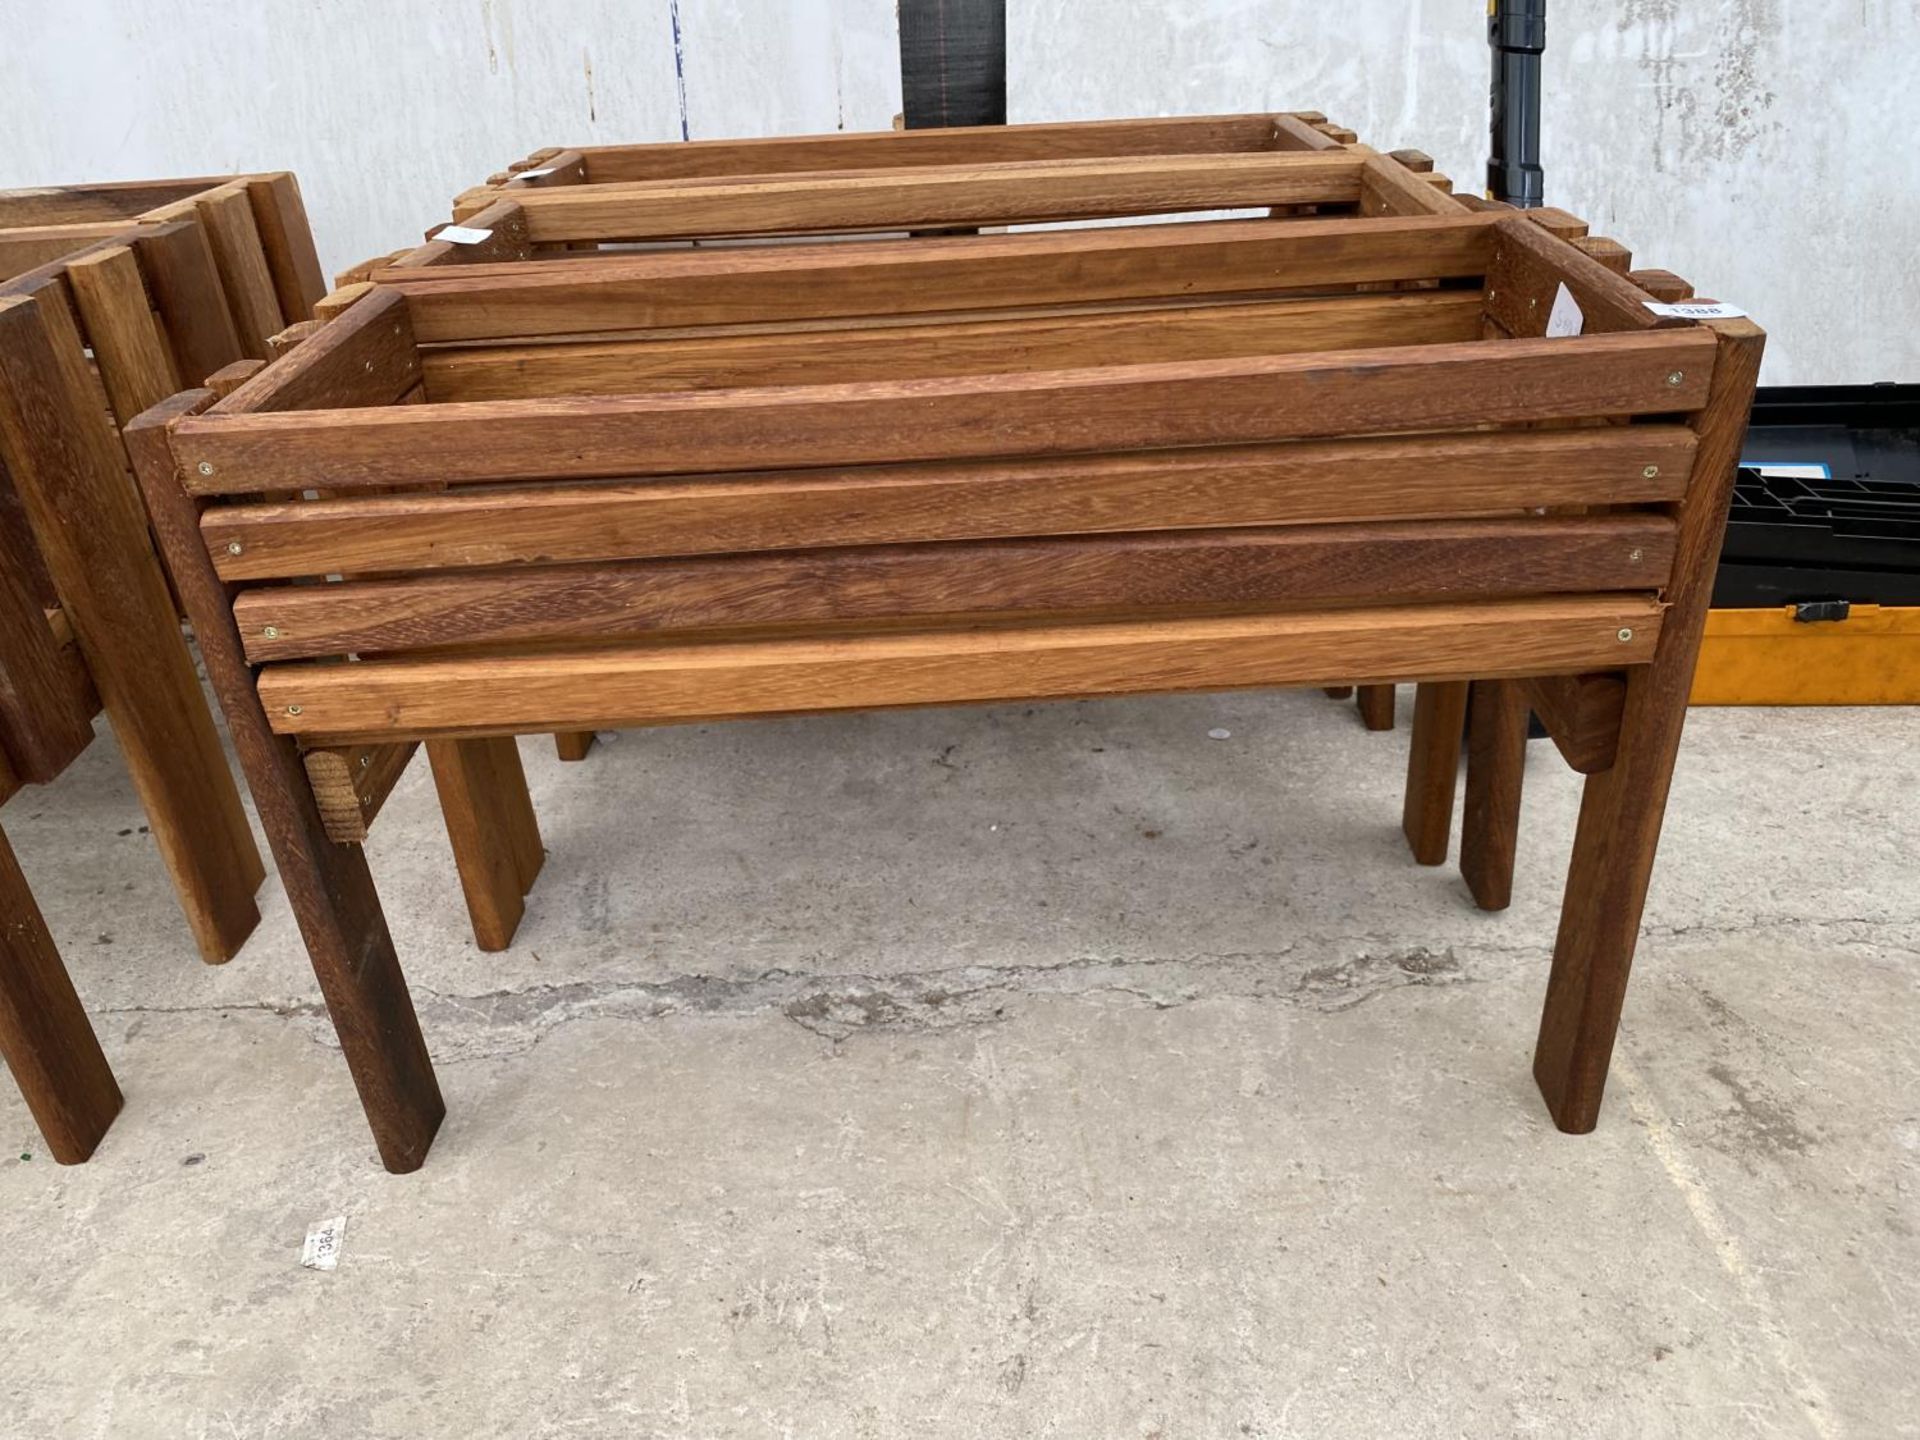 THREE WOODEN TROUGH PLANTER STANDS - Image 2 of 6